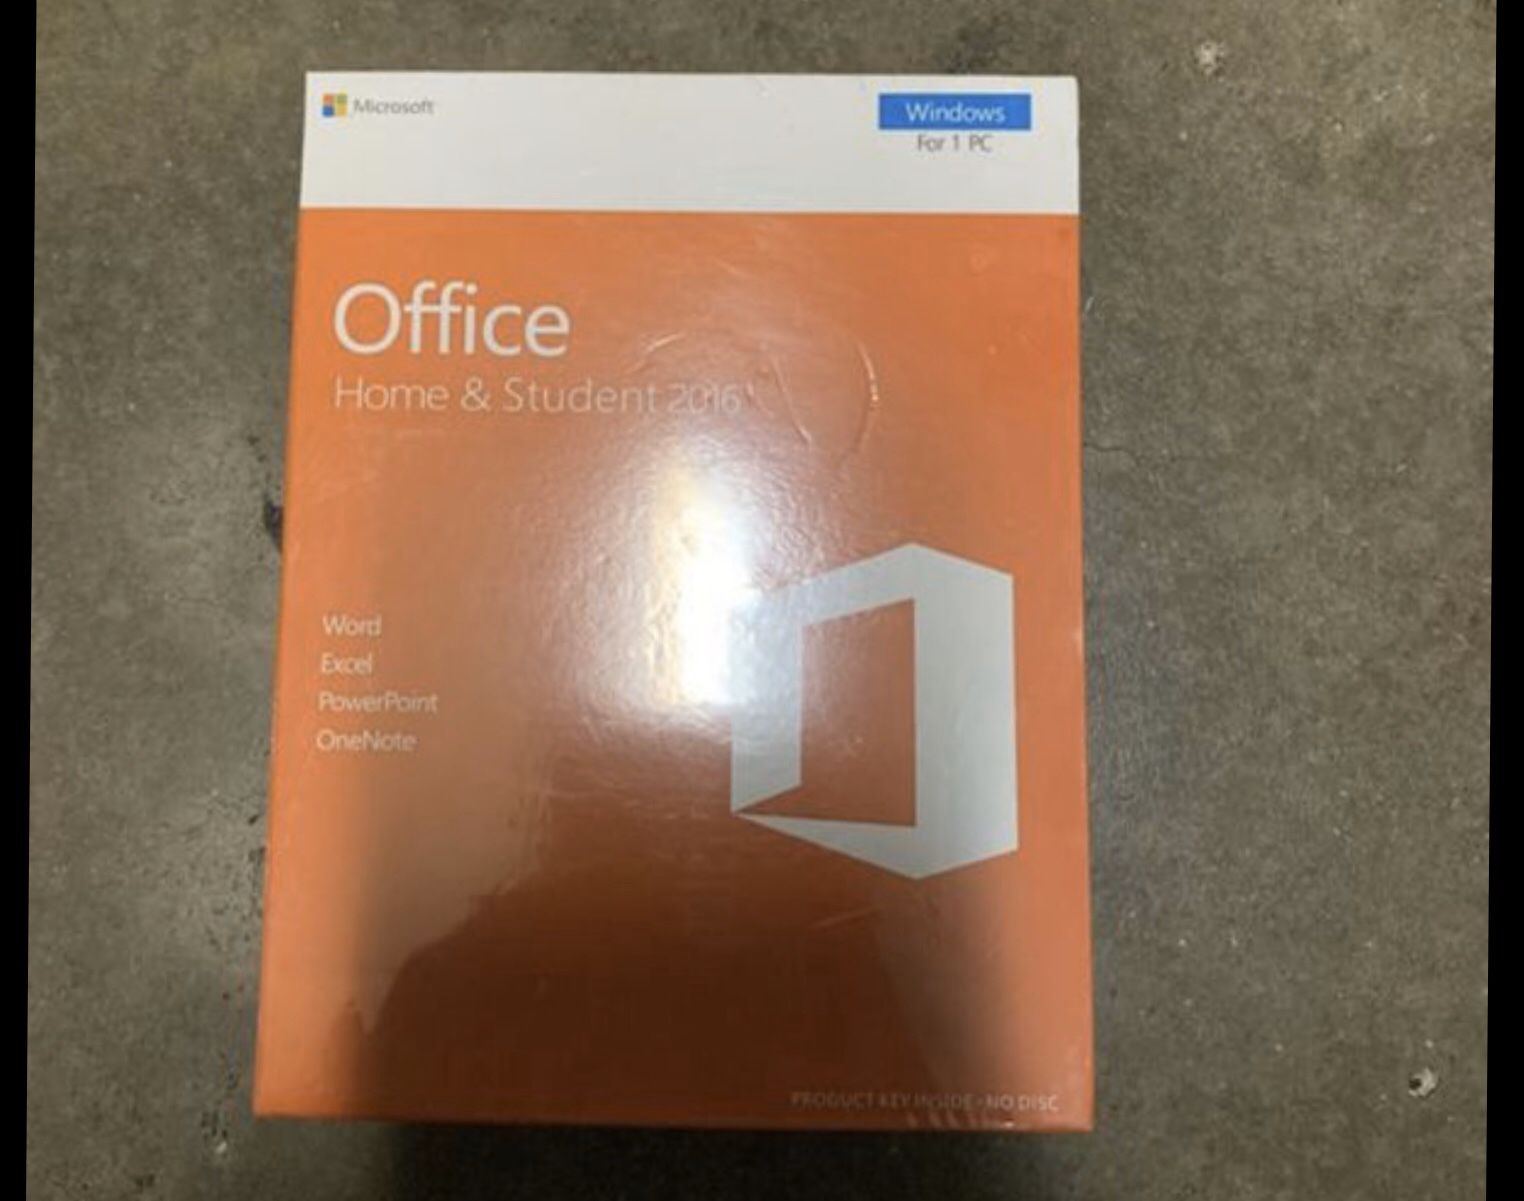 Microsoft Office Home and Student 2016 for Windows PC KEY & DOWNLOAD LINK